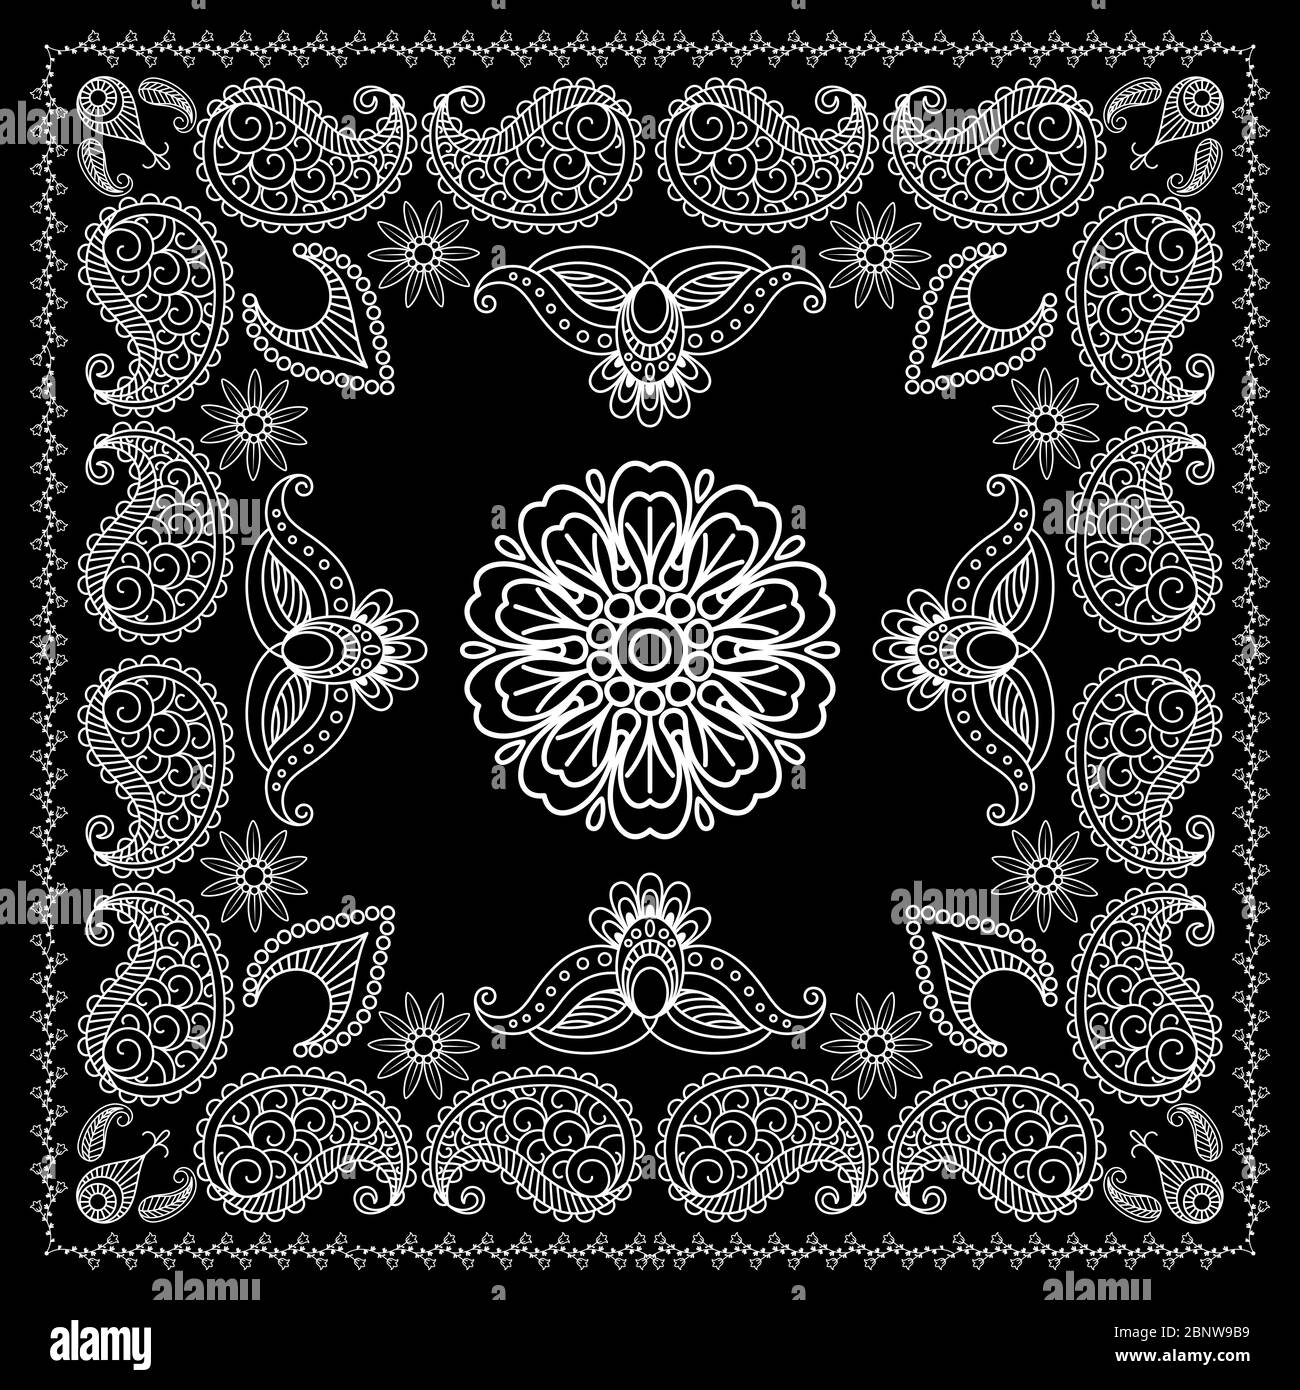 Black and White Bandana Print With Element Henna Style. Vector illustration Stock Vector